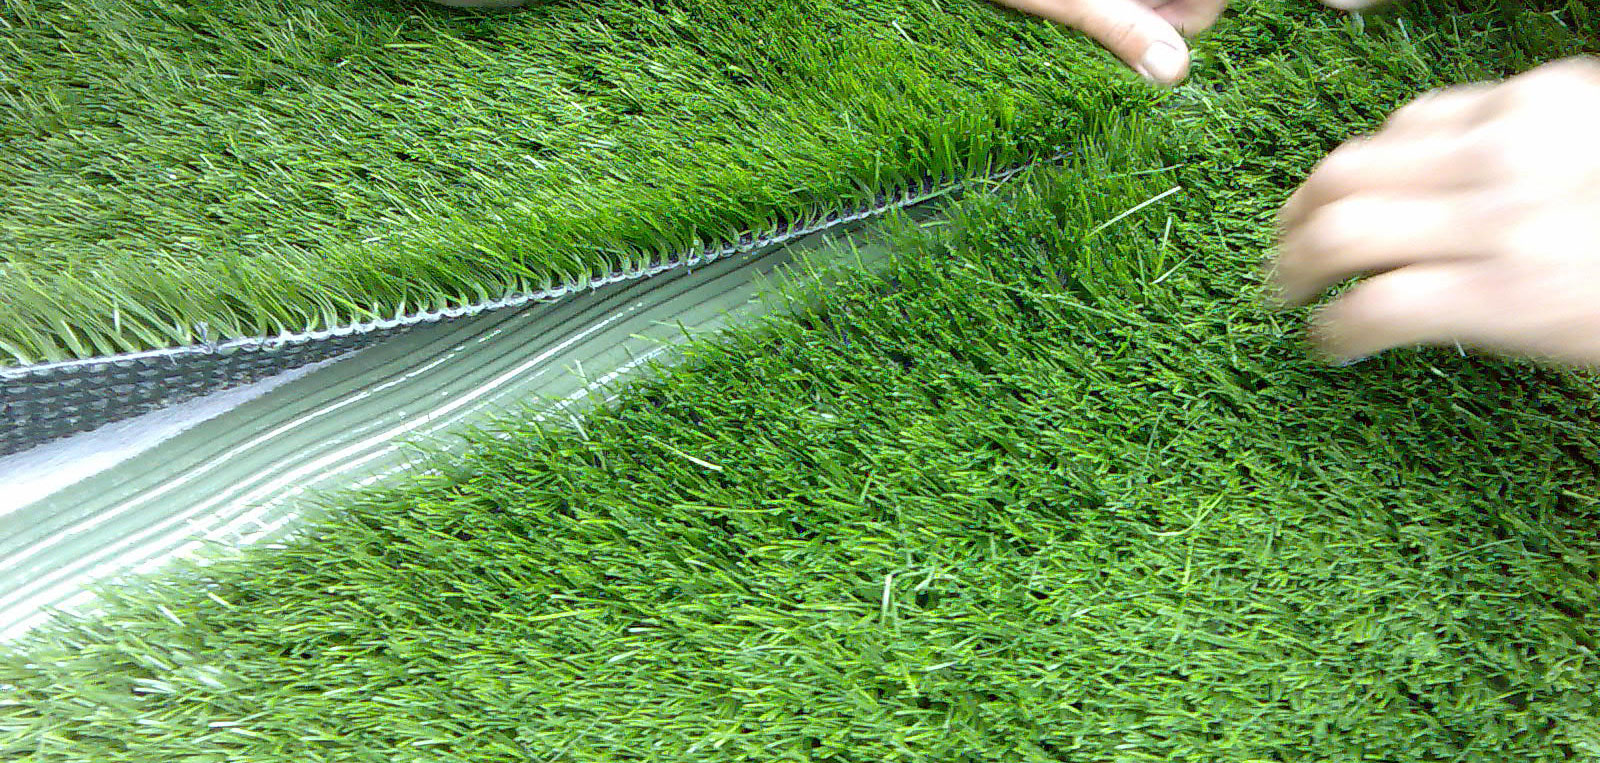 Port St. Lucie Safety Surfacing-Synthetic Grass-additional image